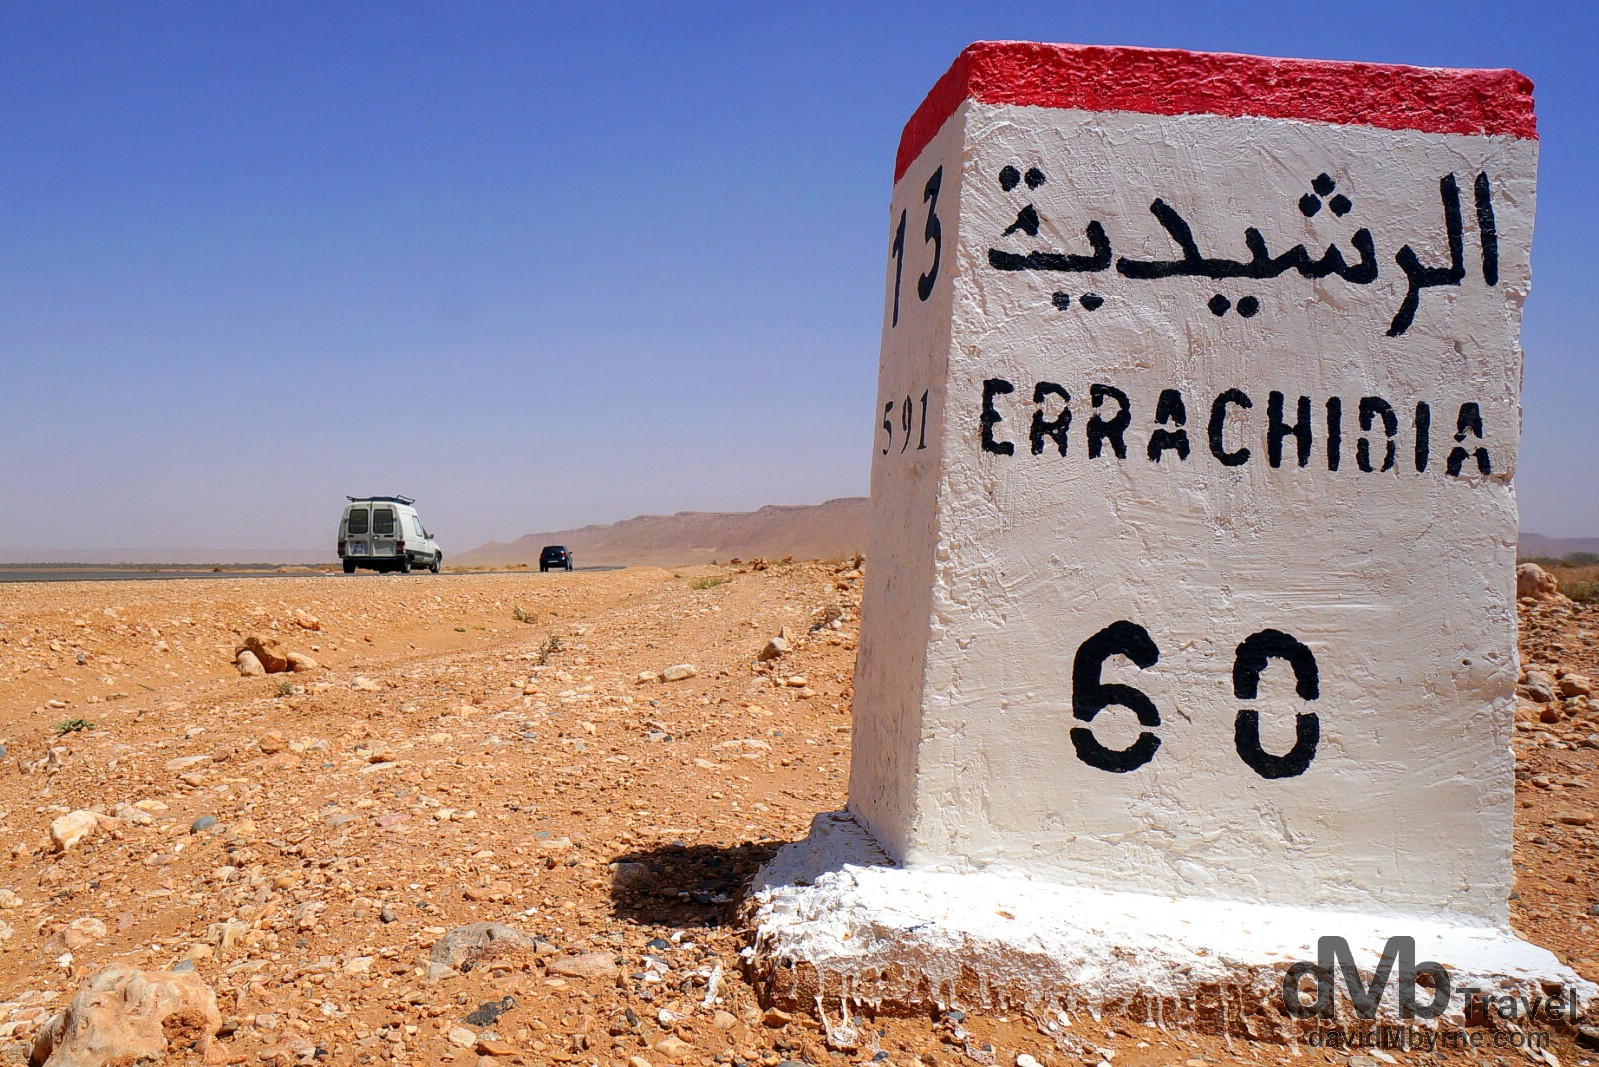 On the N13 en route from Merzouga to Er Rachidia, southern Morocco. May 22nd, 2014.